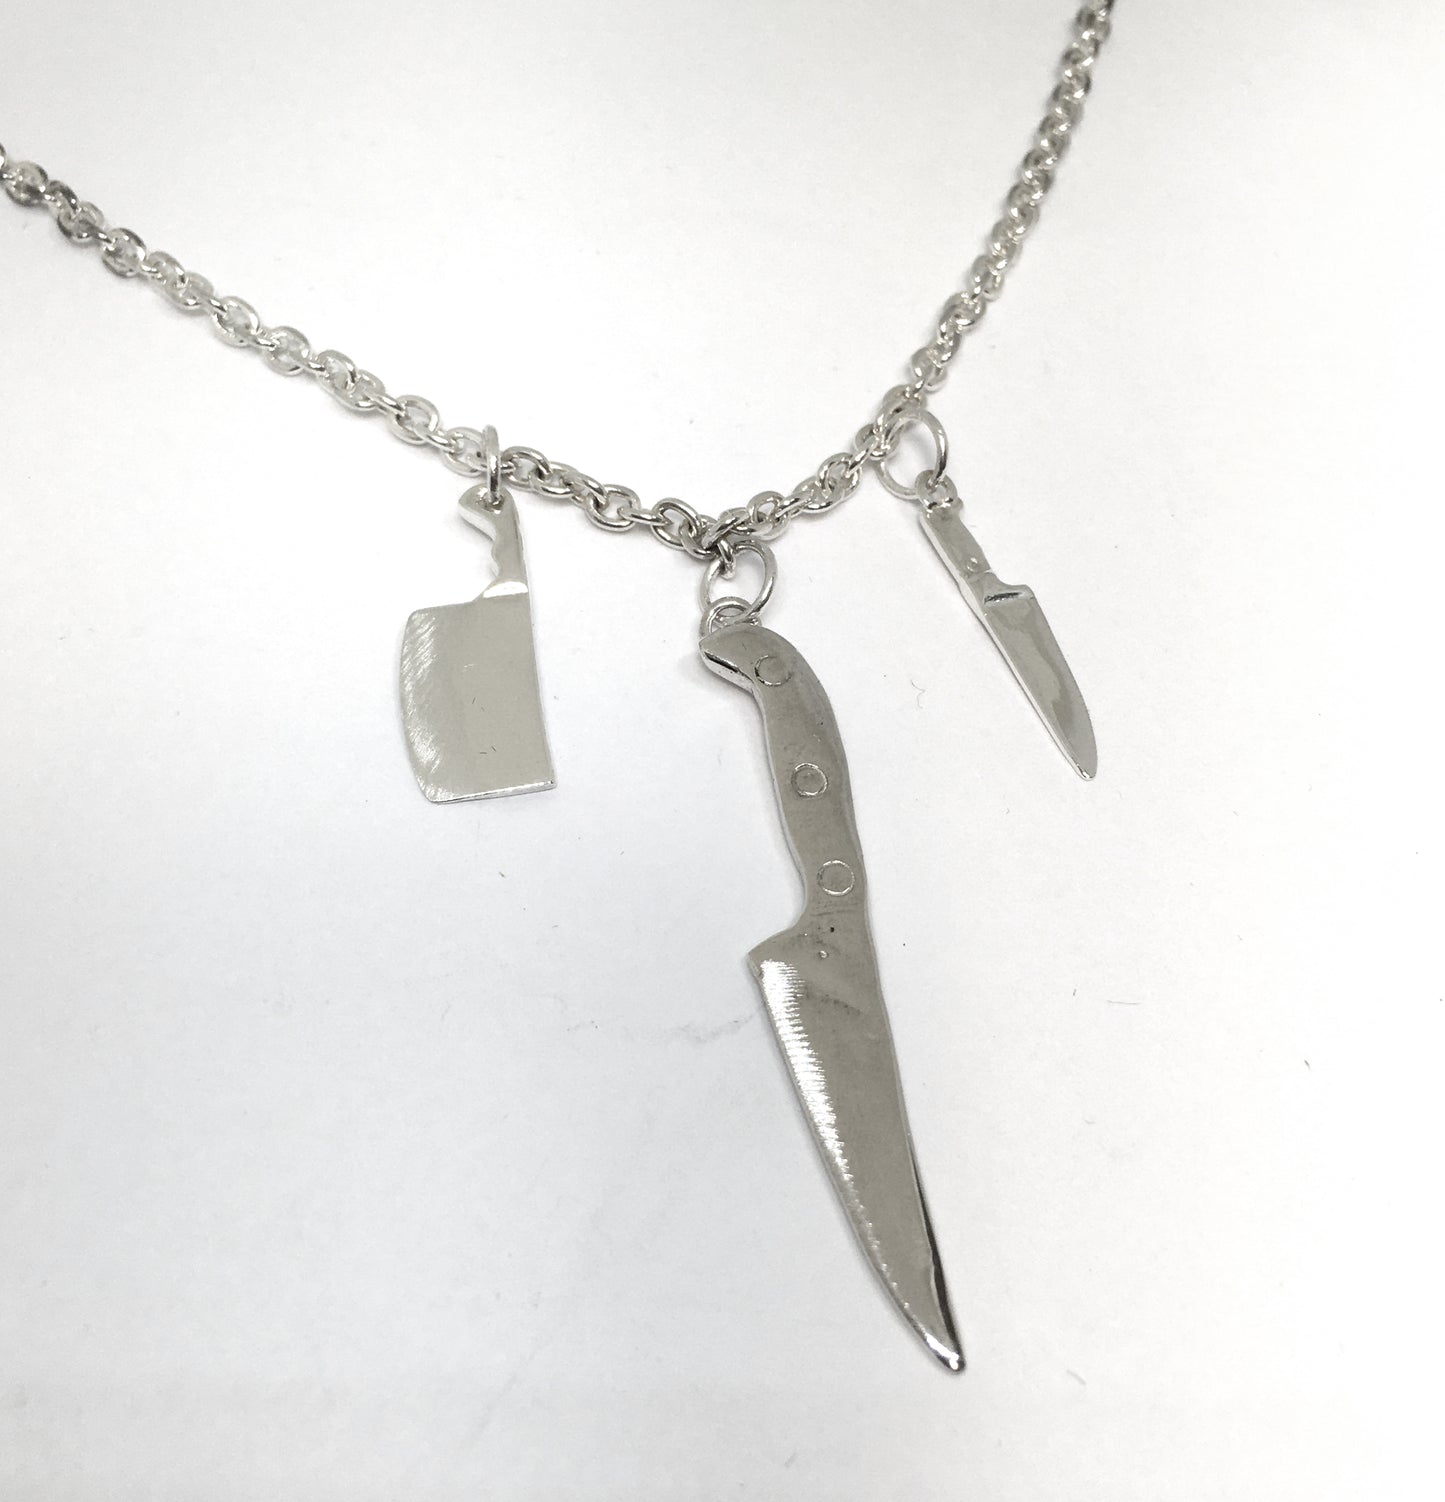 Chef Knife Statement Necklace in Sterling Silver